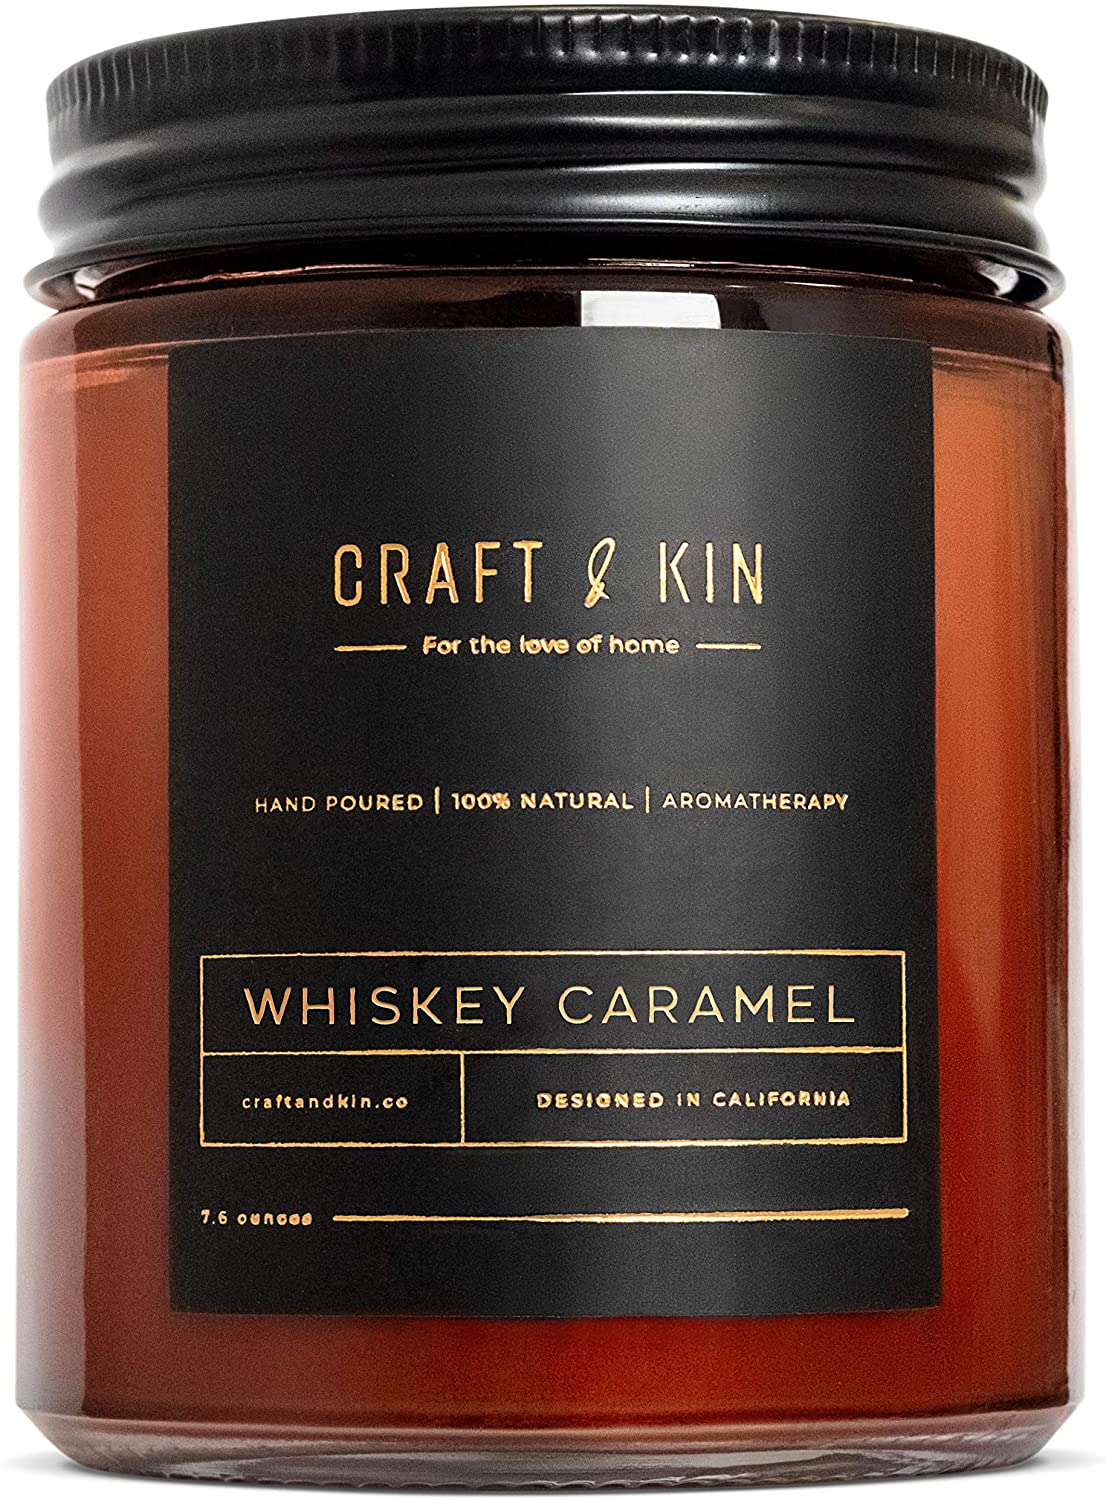 Whiskey caramel scented candle